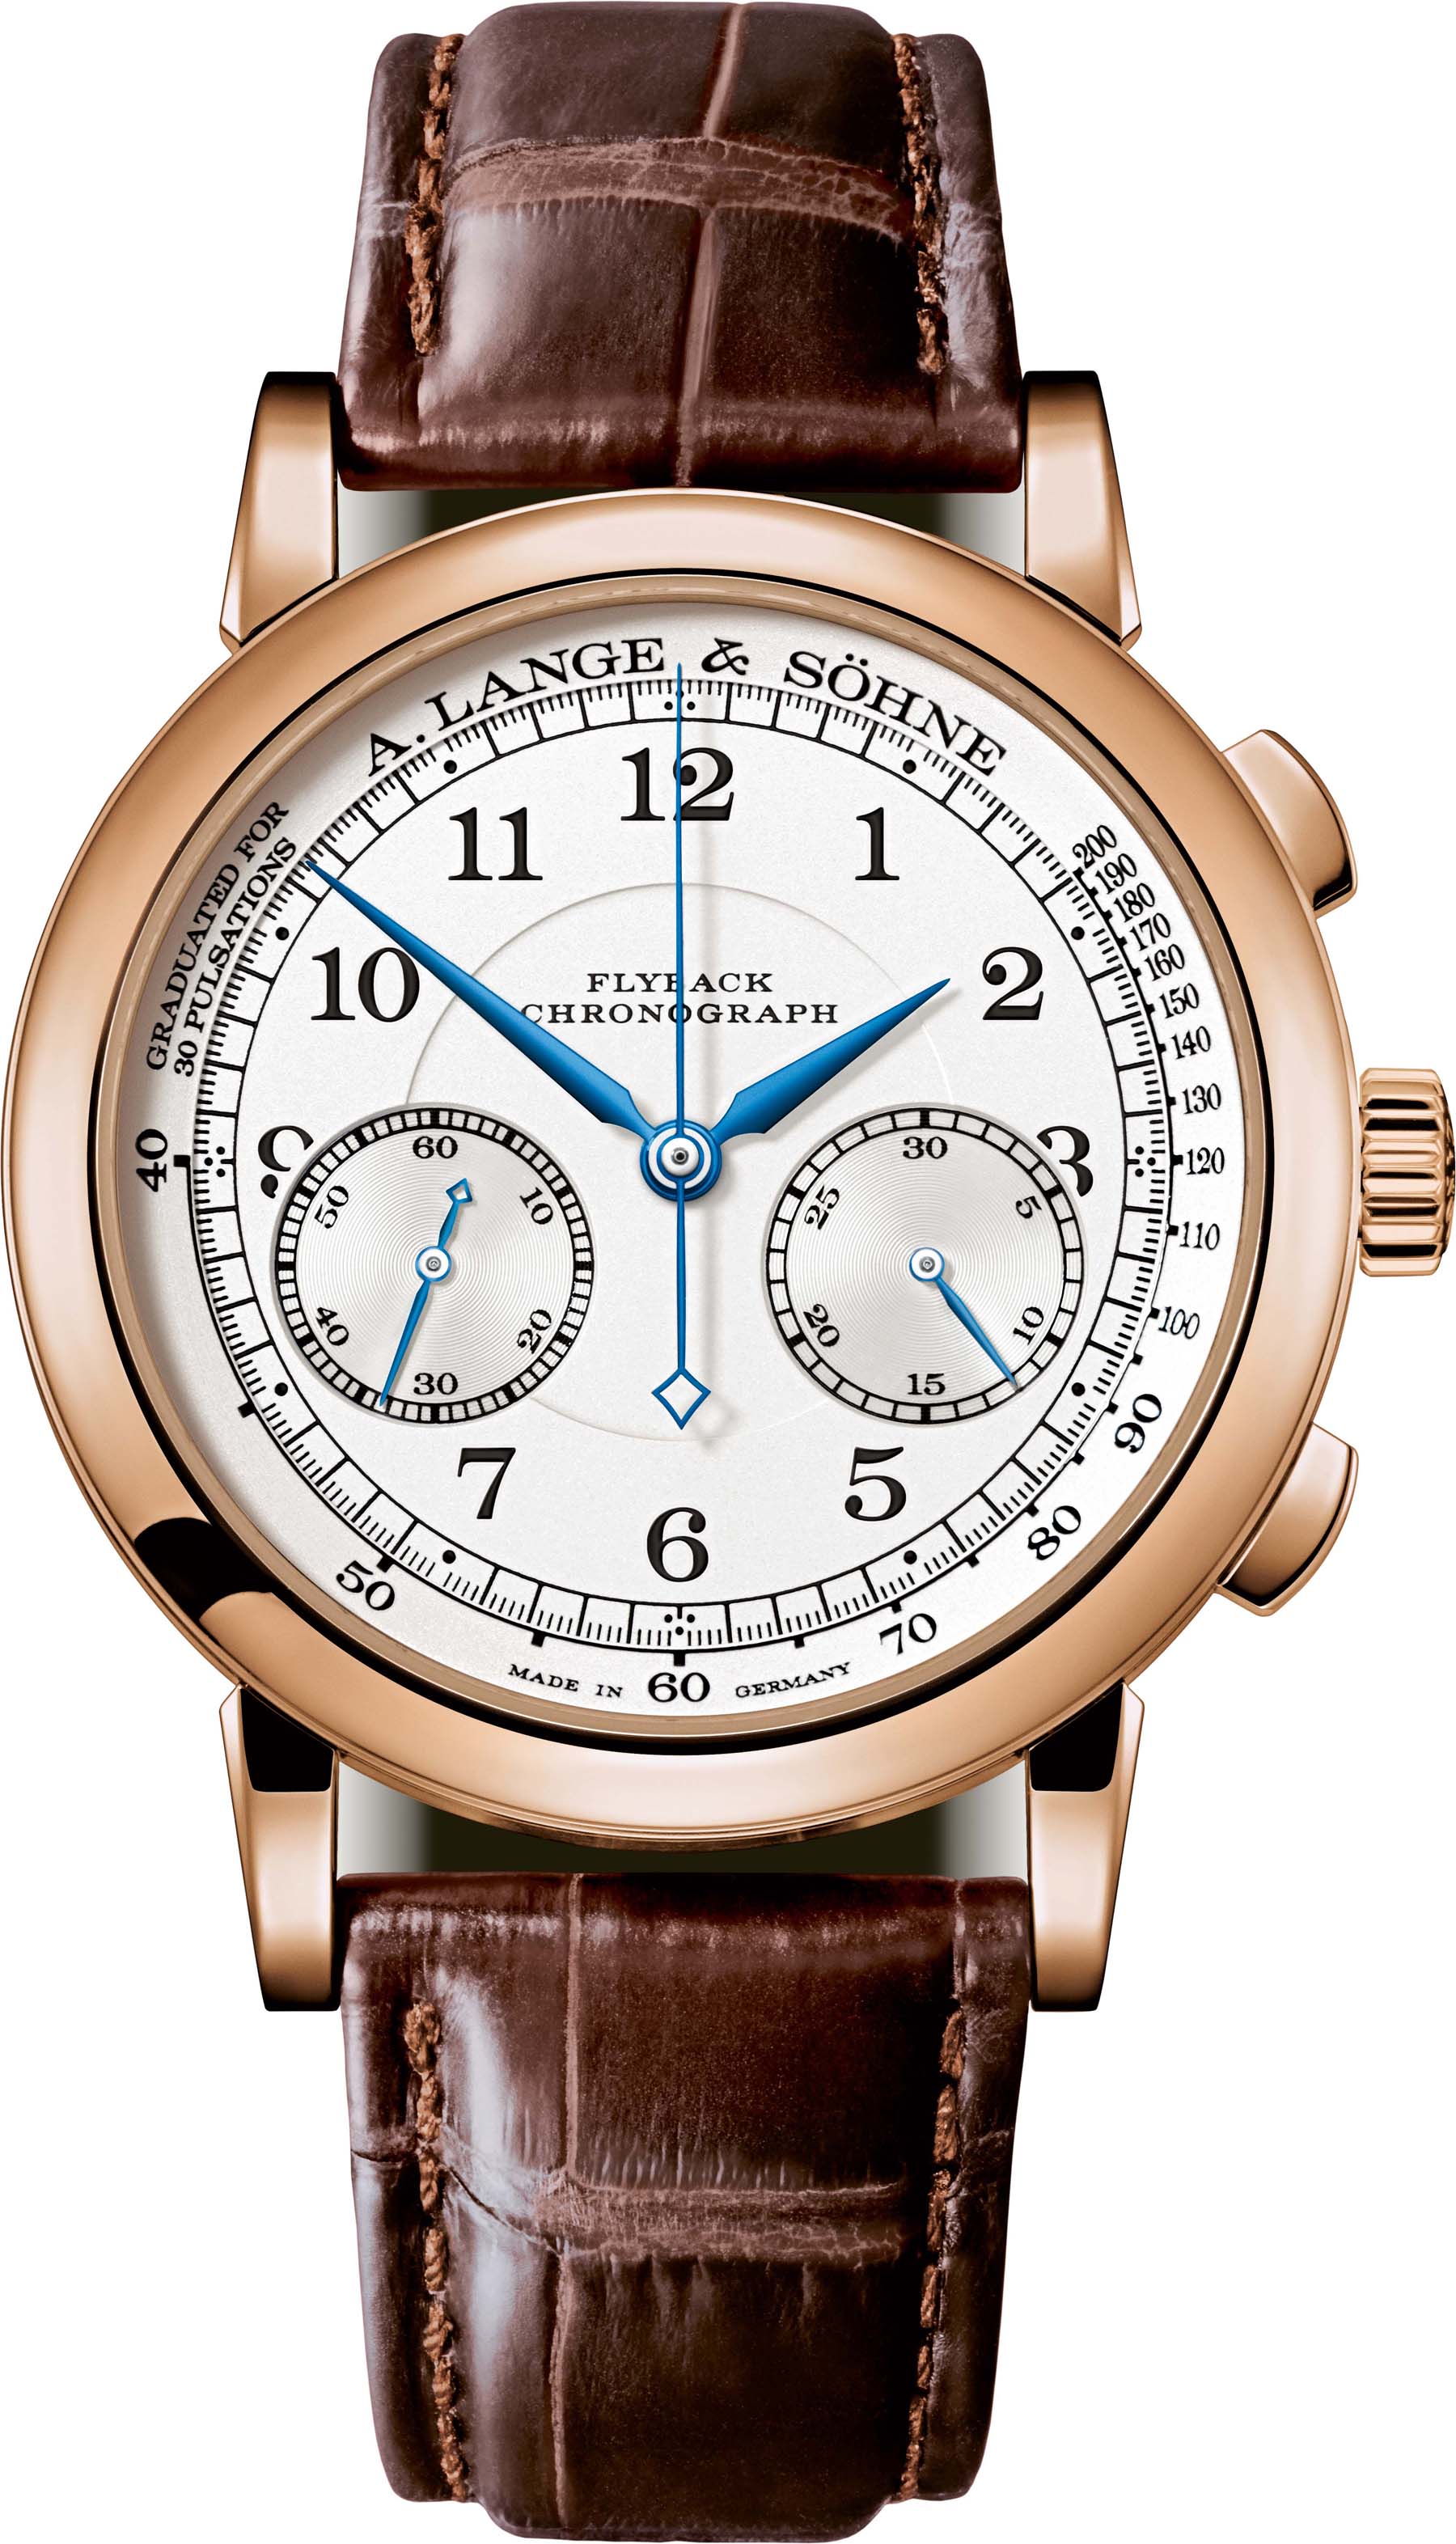 1815 Chronograph in pink-gold with argenté-coloured dial